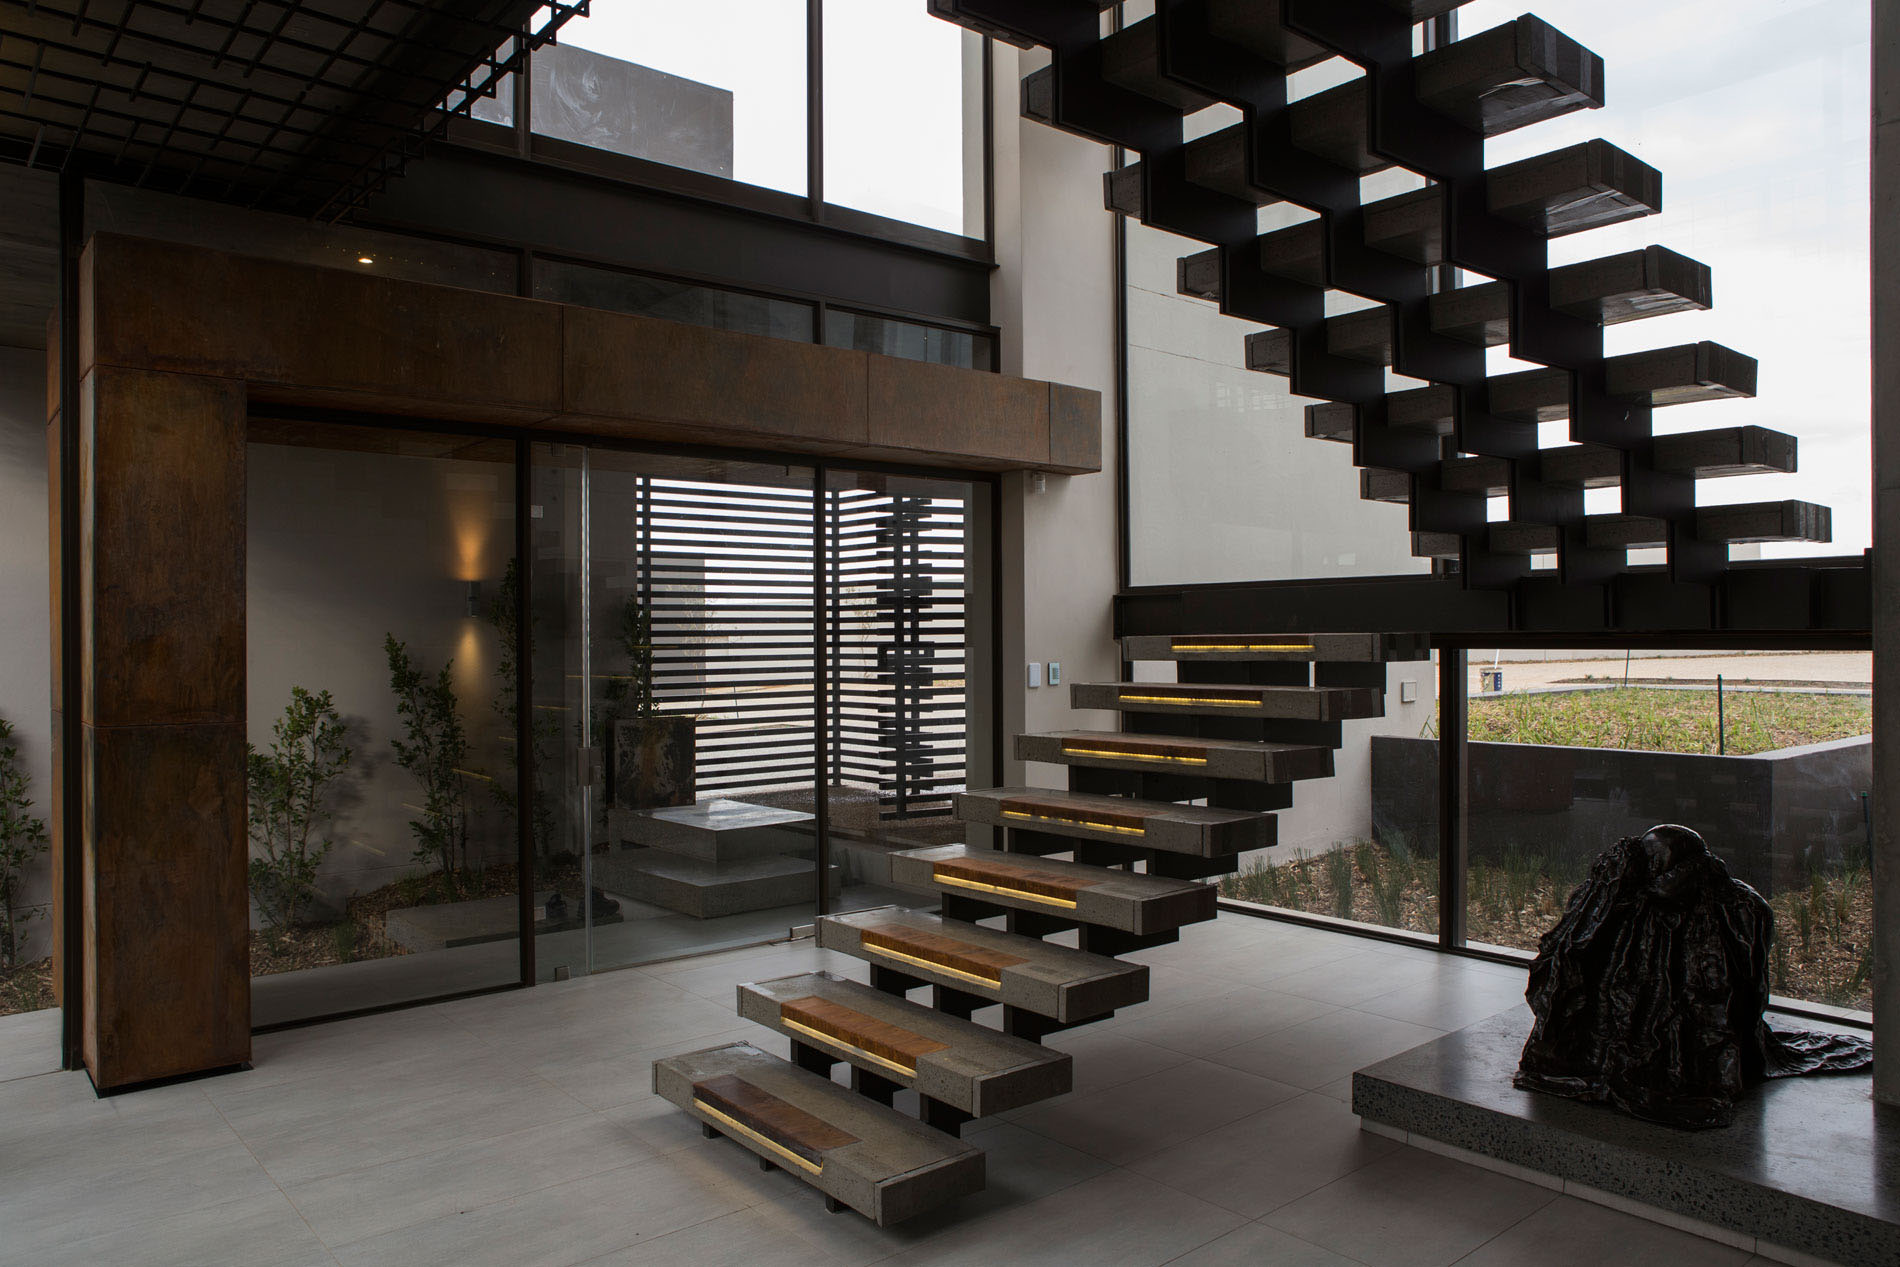 Room Space House Awesome Room Space Design Of House Boz By Nico Van Der Meulen Architects With Dark Colored Wooden Material Dream Homes Spacious And Concrete Contemporary House With Glass And Steel Elements